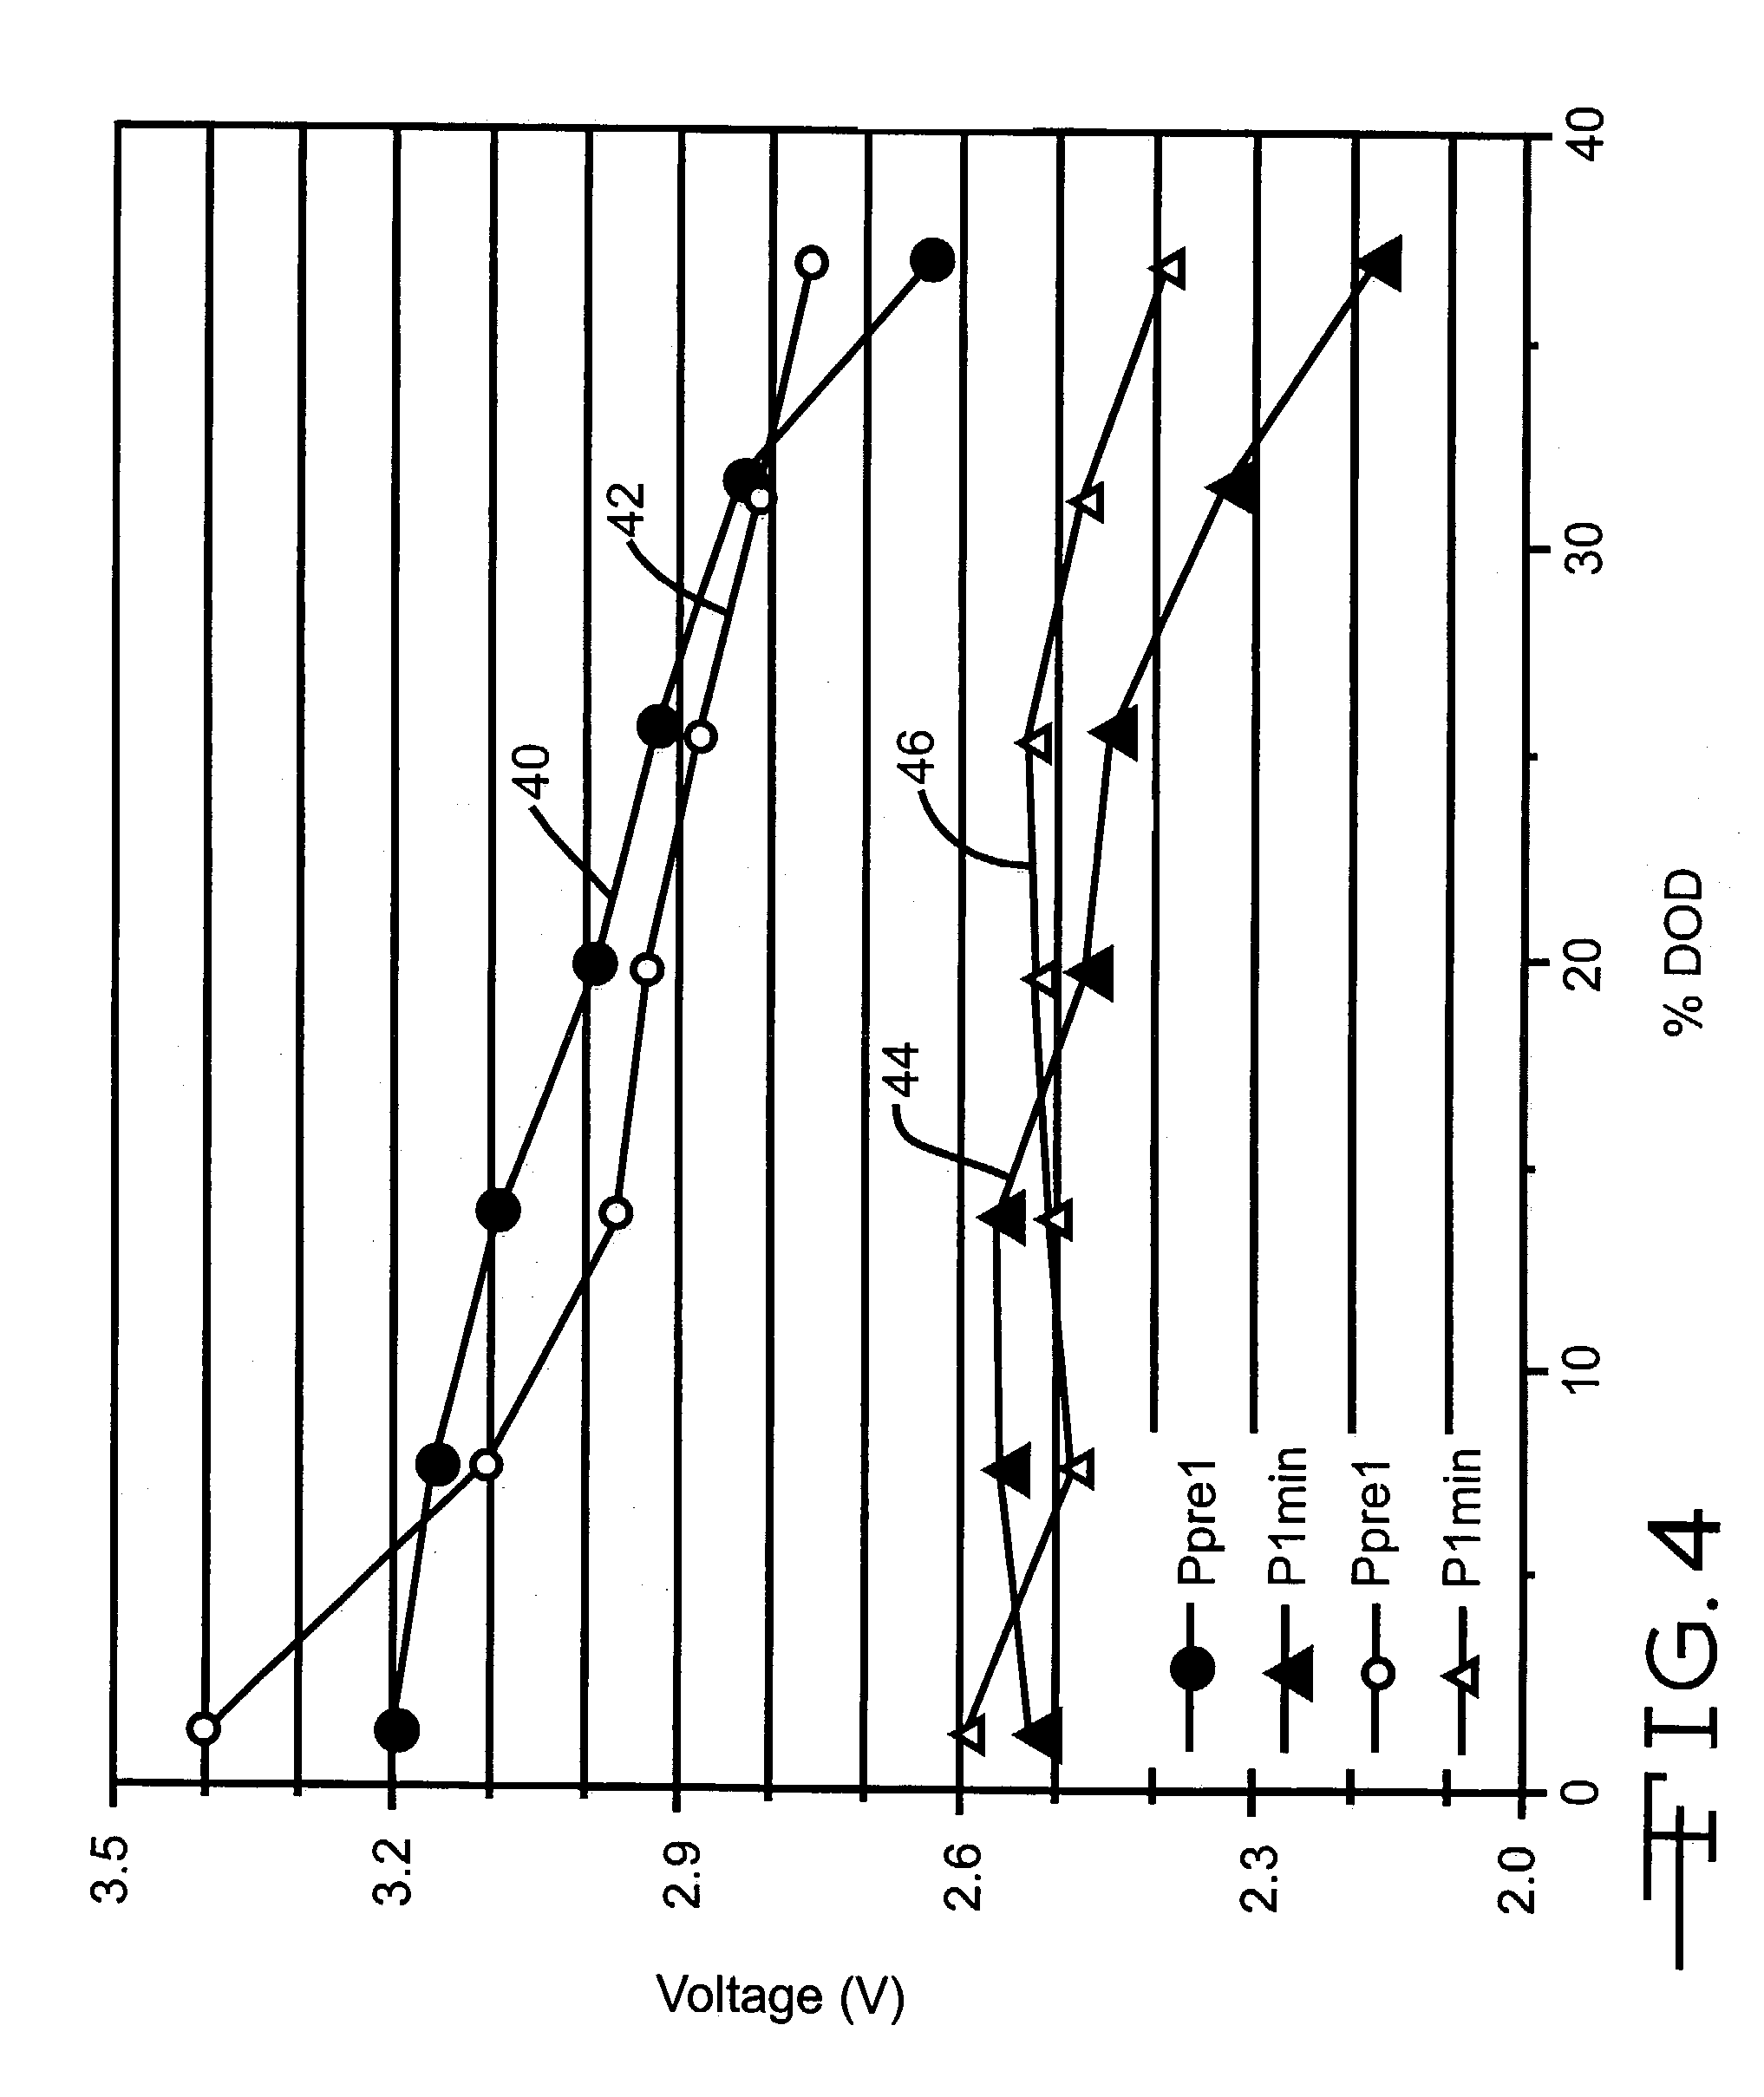 Method for using high rate lithium electrochemical cell containing SVO/CFchi/SVo sandwich cathodes having gamma-SVO and mixture of gamma-SVO/epsilon-SVO